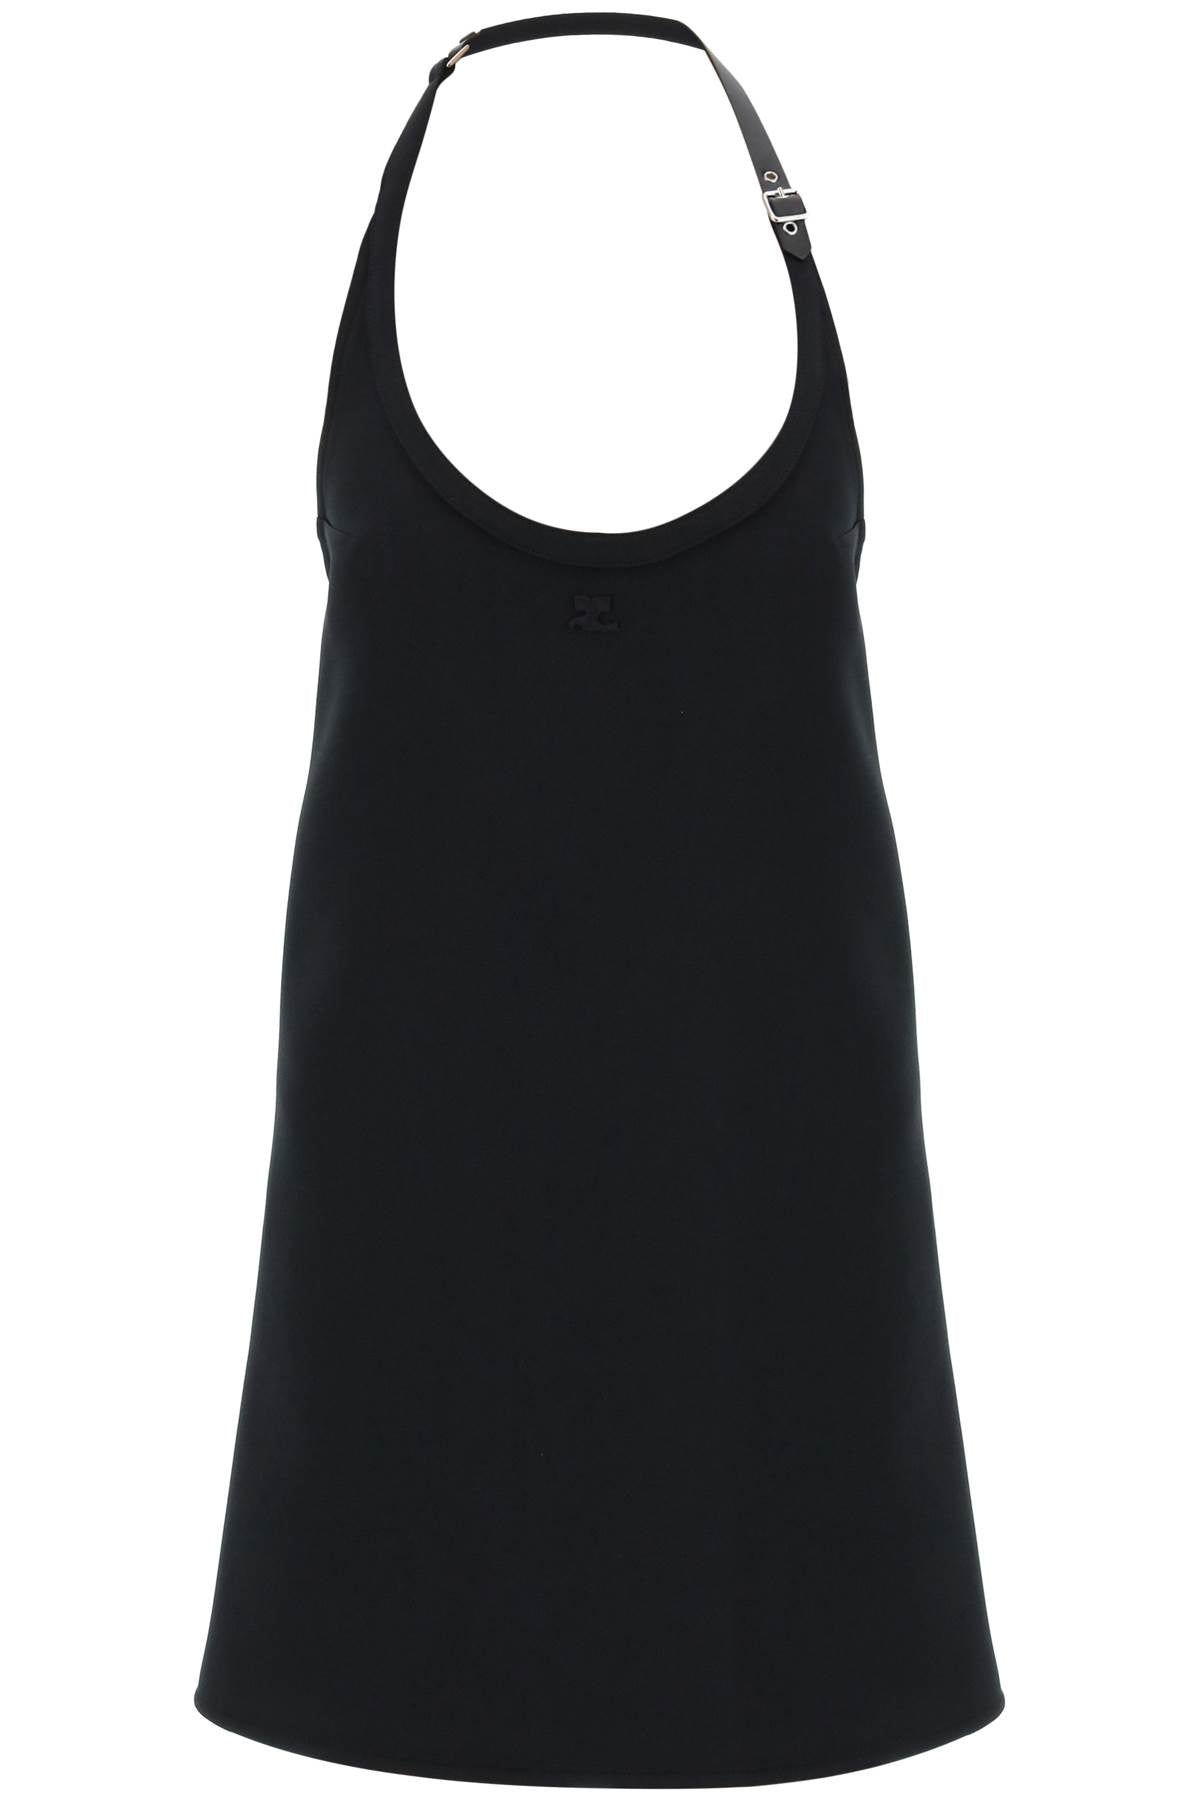 Courreges mini dress with strap and buckle detail.-0